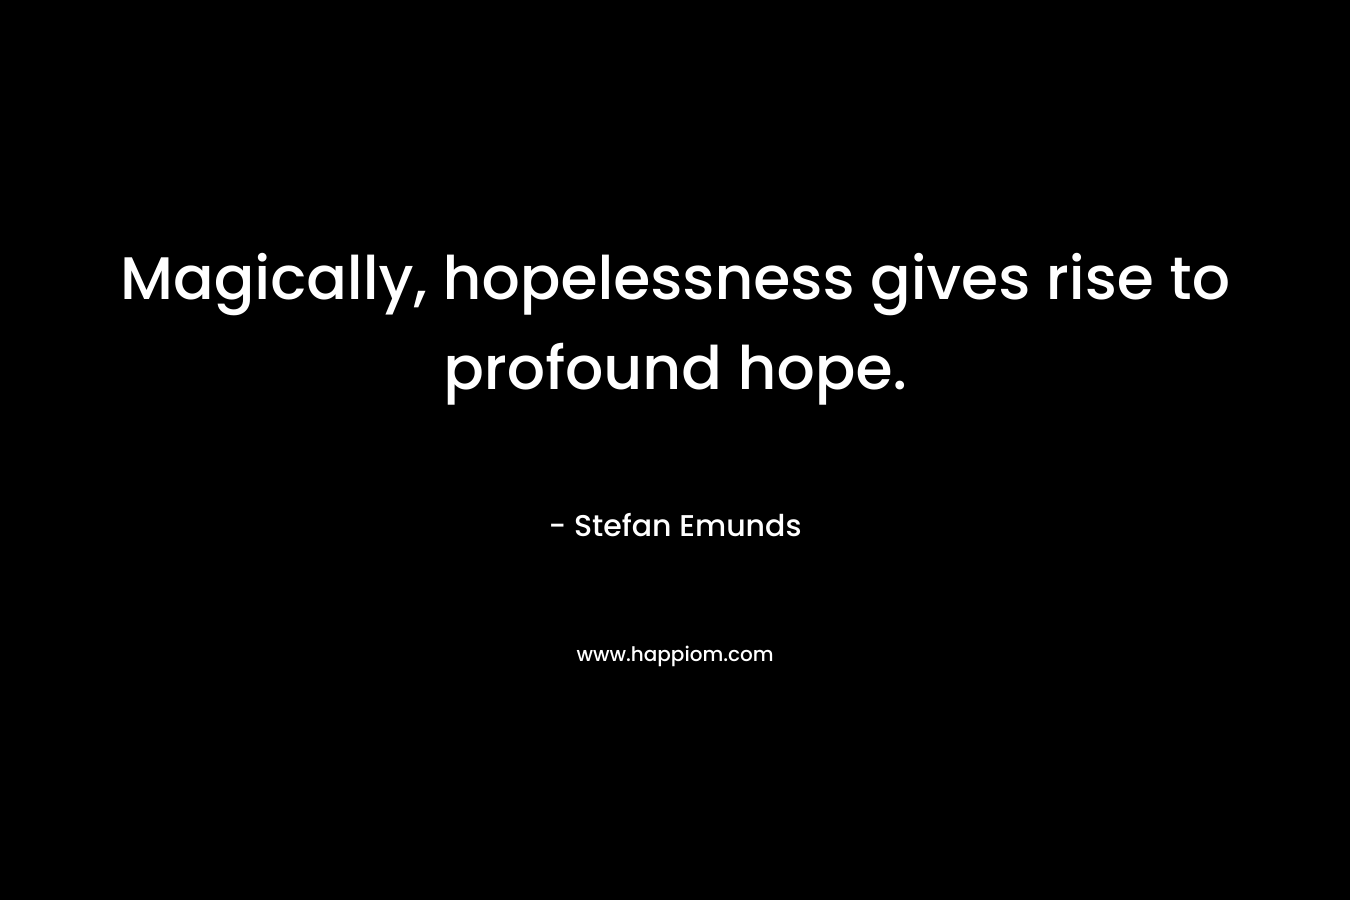 Magically, hopelessness gives rise to profound hope. – Stefan Emunds